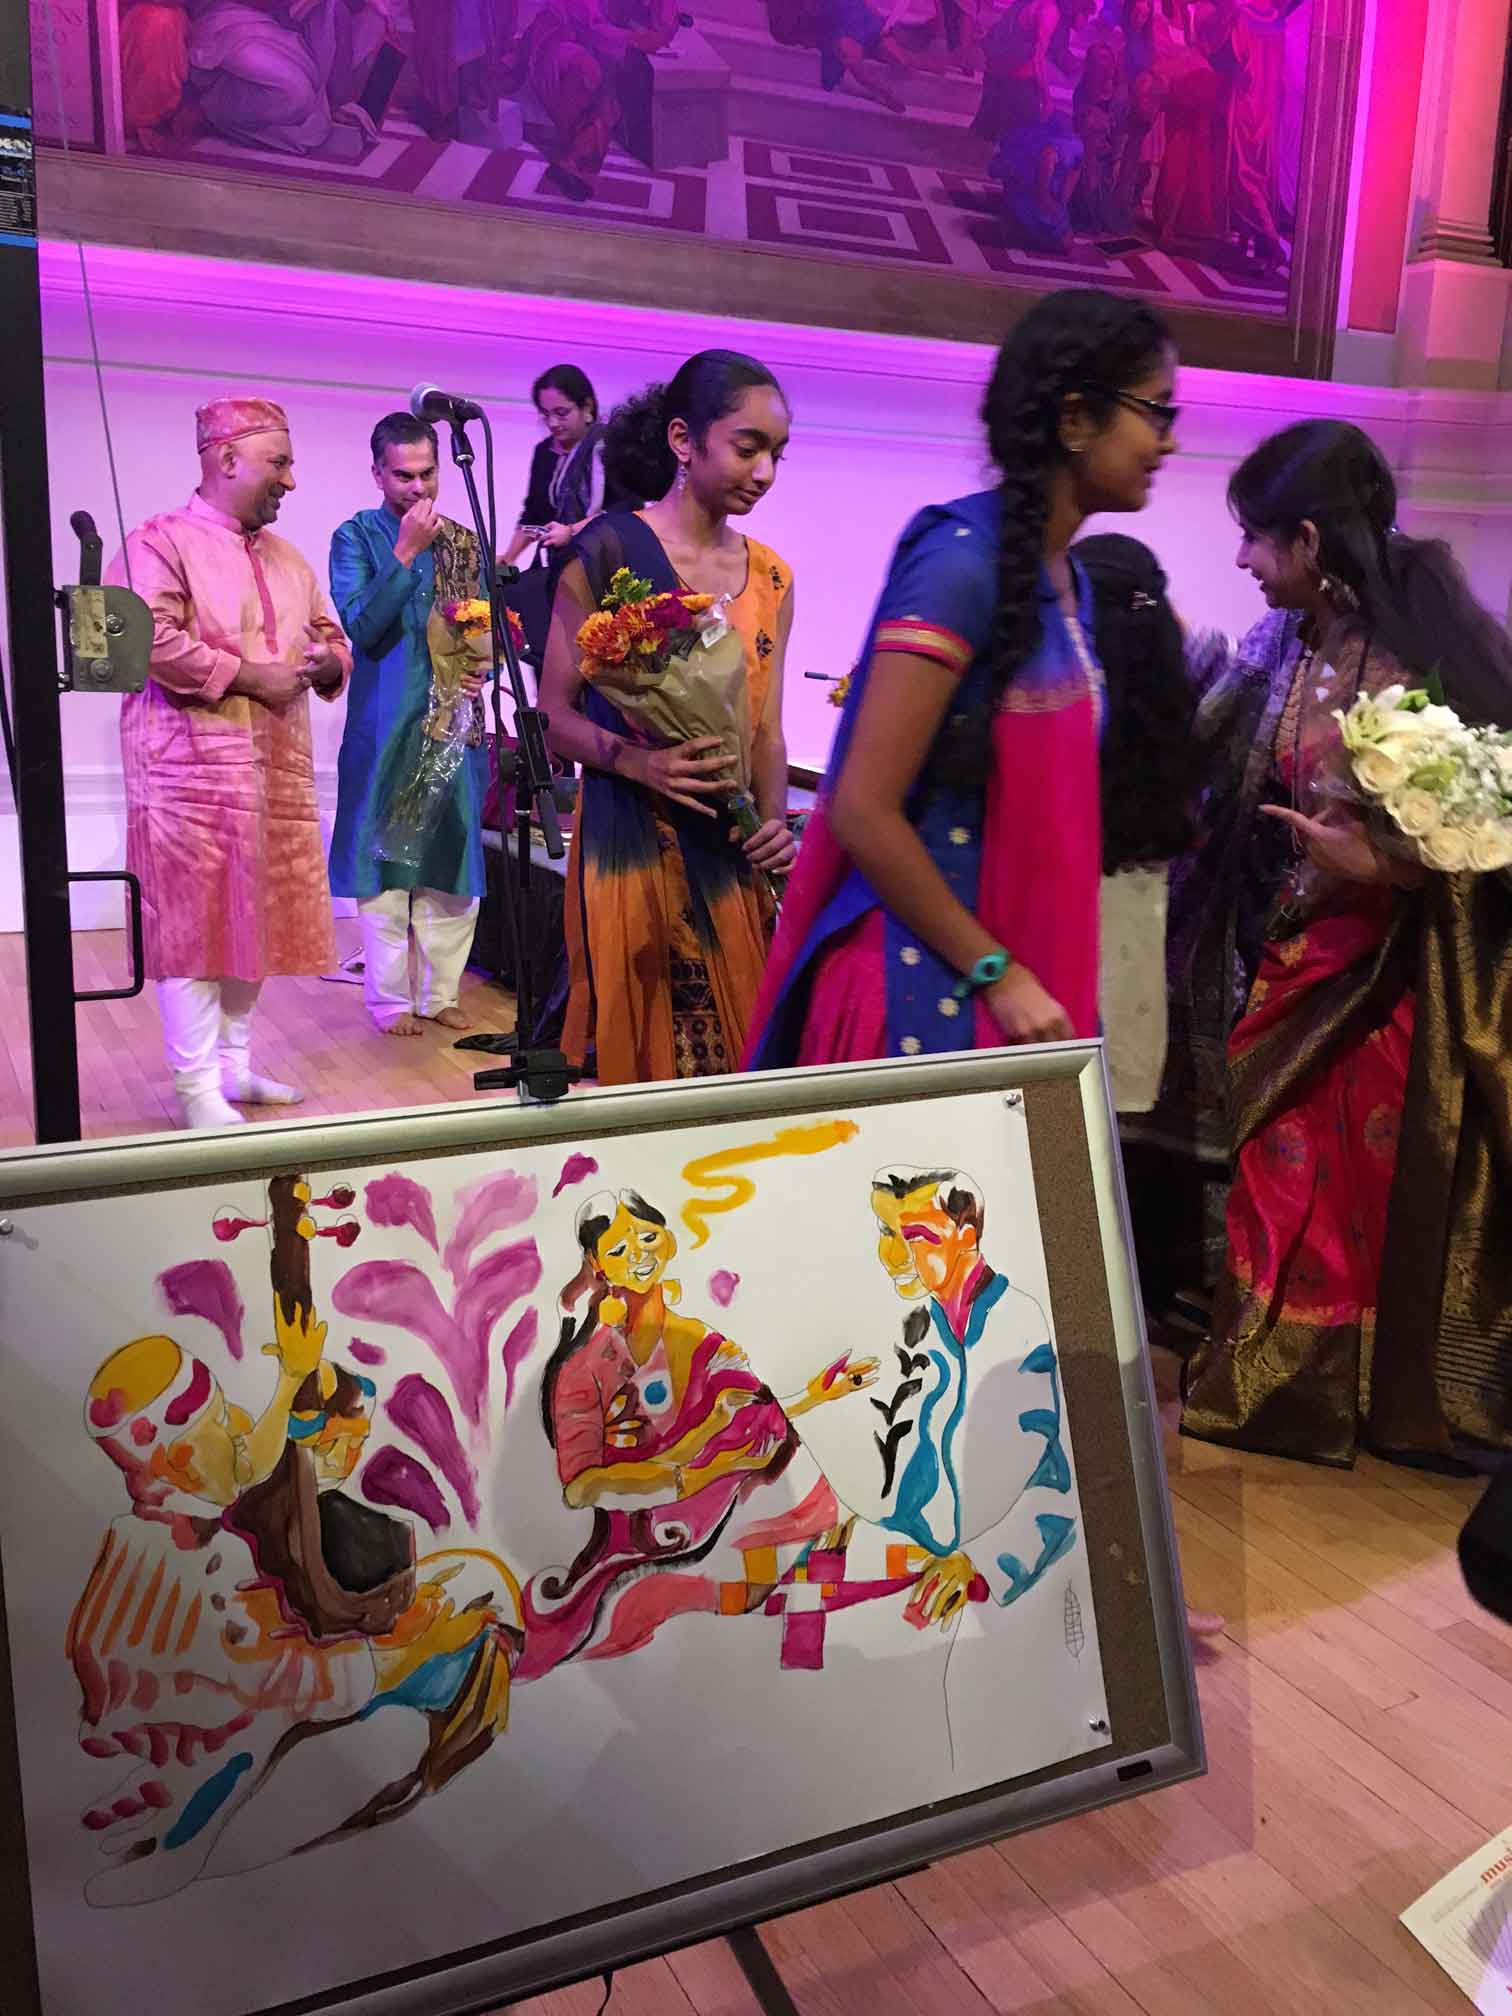 Live painting at the UVA Indian classical night